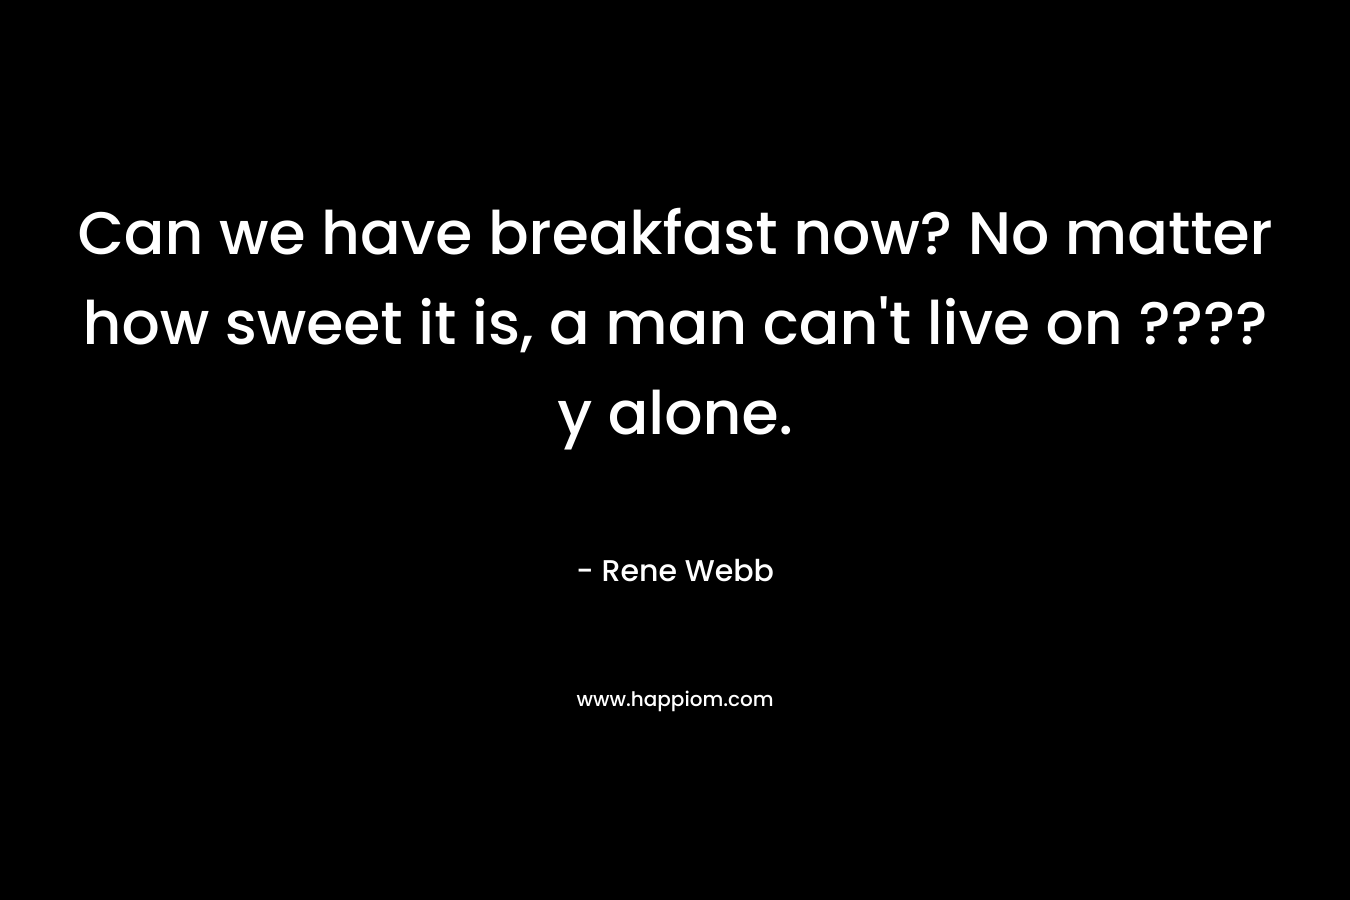 Can we have breakfast now? No matter how sweet it is, a man can't live on ????y alone.